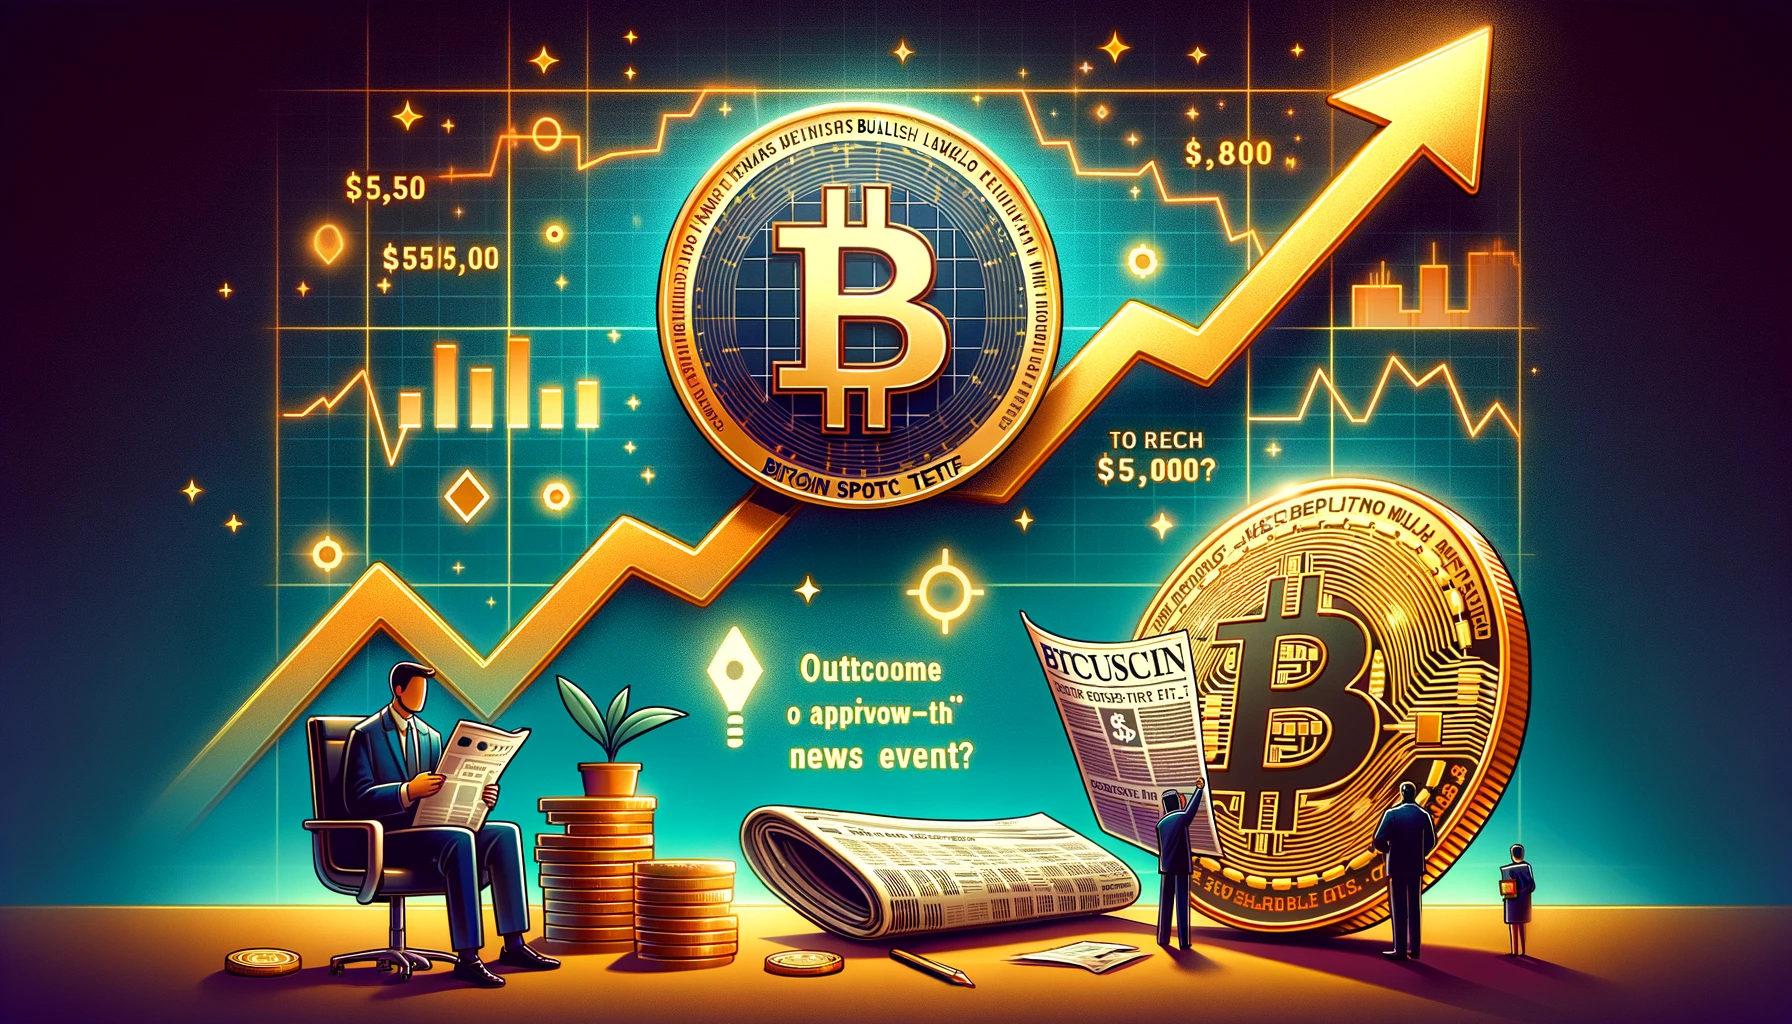 Crypto Soothsayer Anticipates Explosive Bitcoin U-Turn, Warns of Short Squeeze Surge